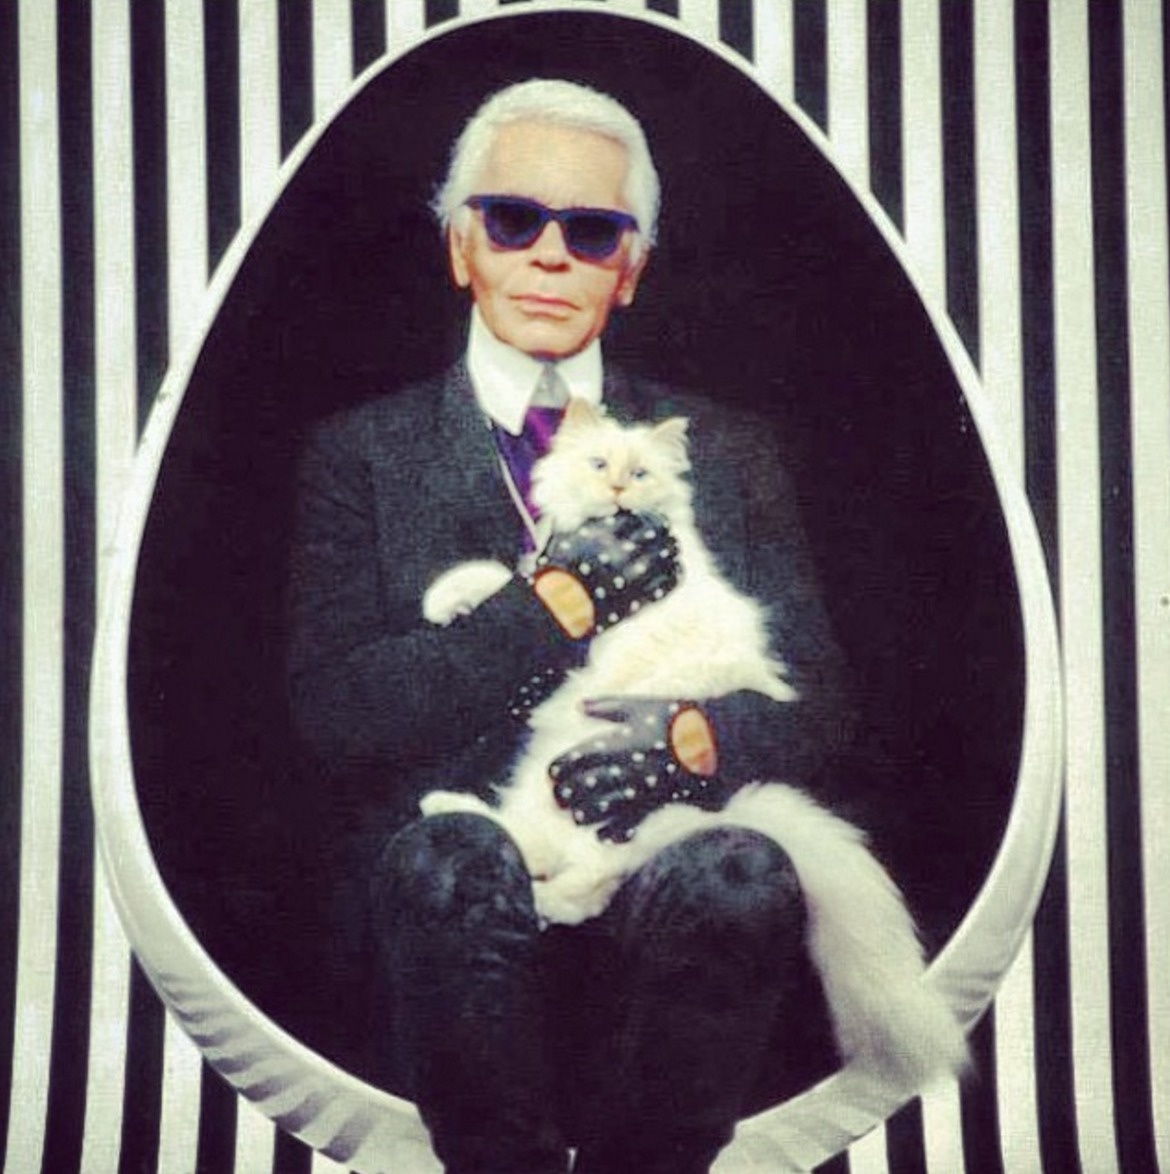 Iconic fashion designer Karl Lagerfeld has fallen in love with his cat Choupette. She was a gift from French male model Baptiste Giabiconi.